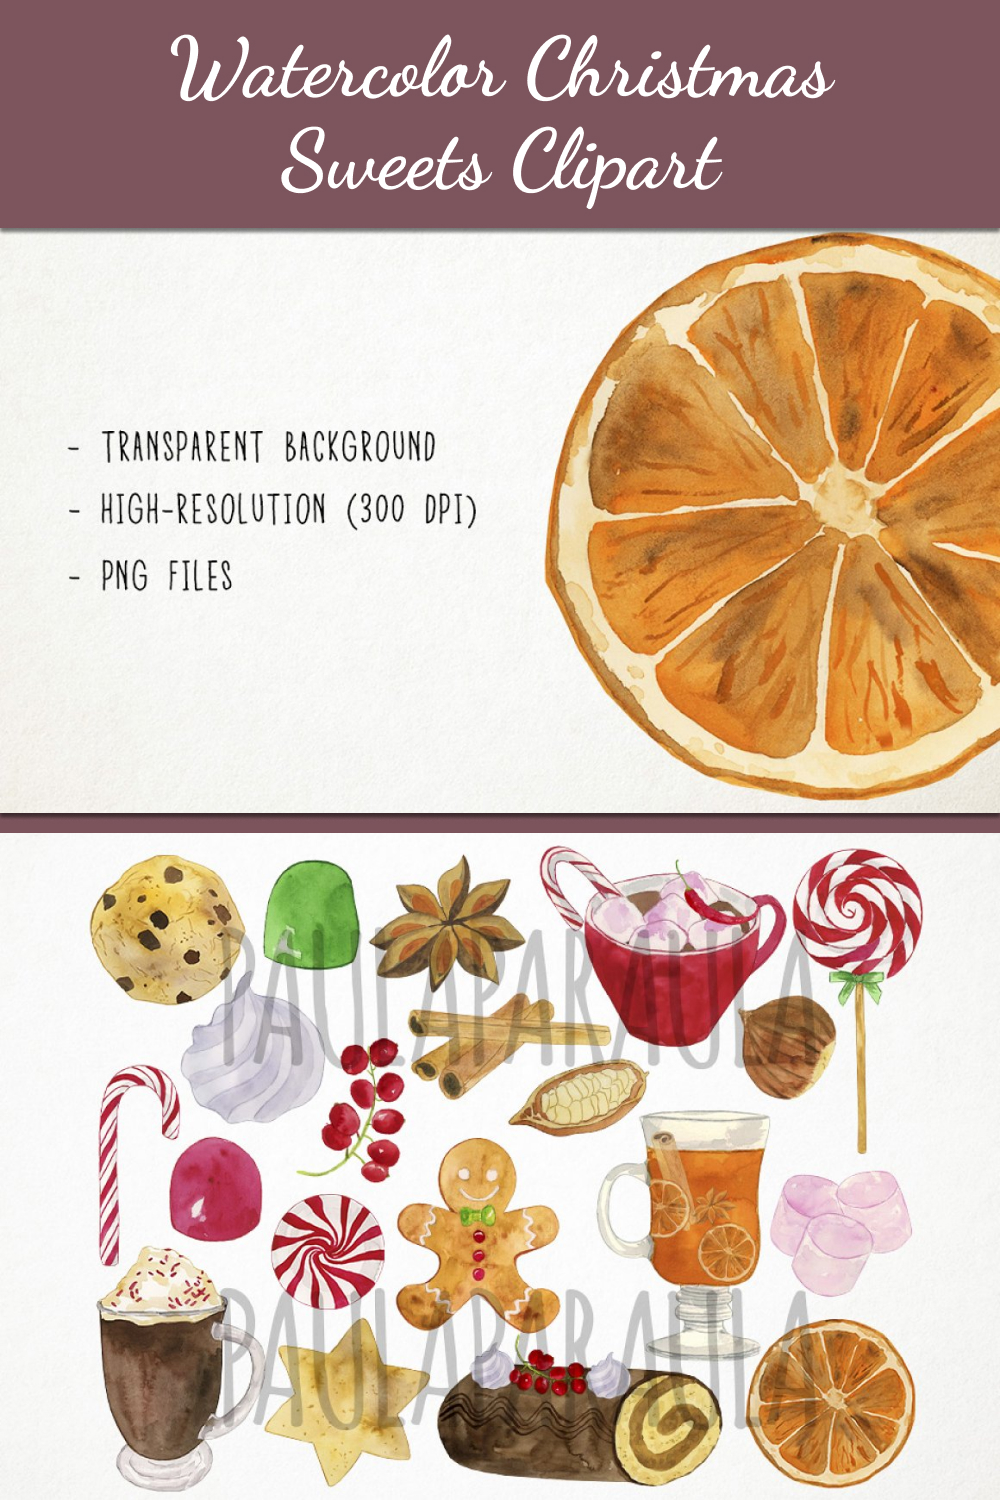 Watercolor christmas sweets clipart of pineterest.